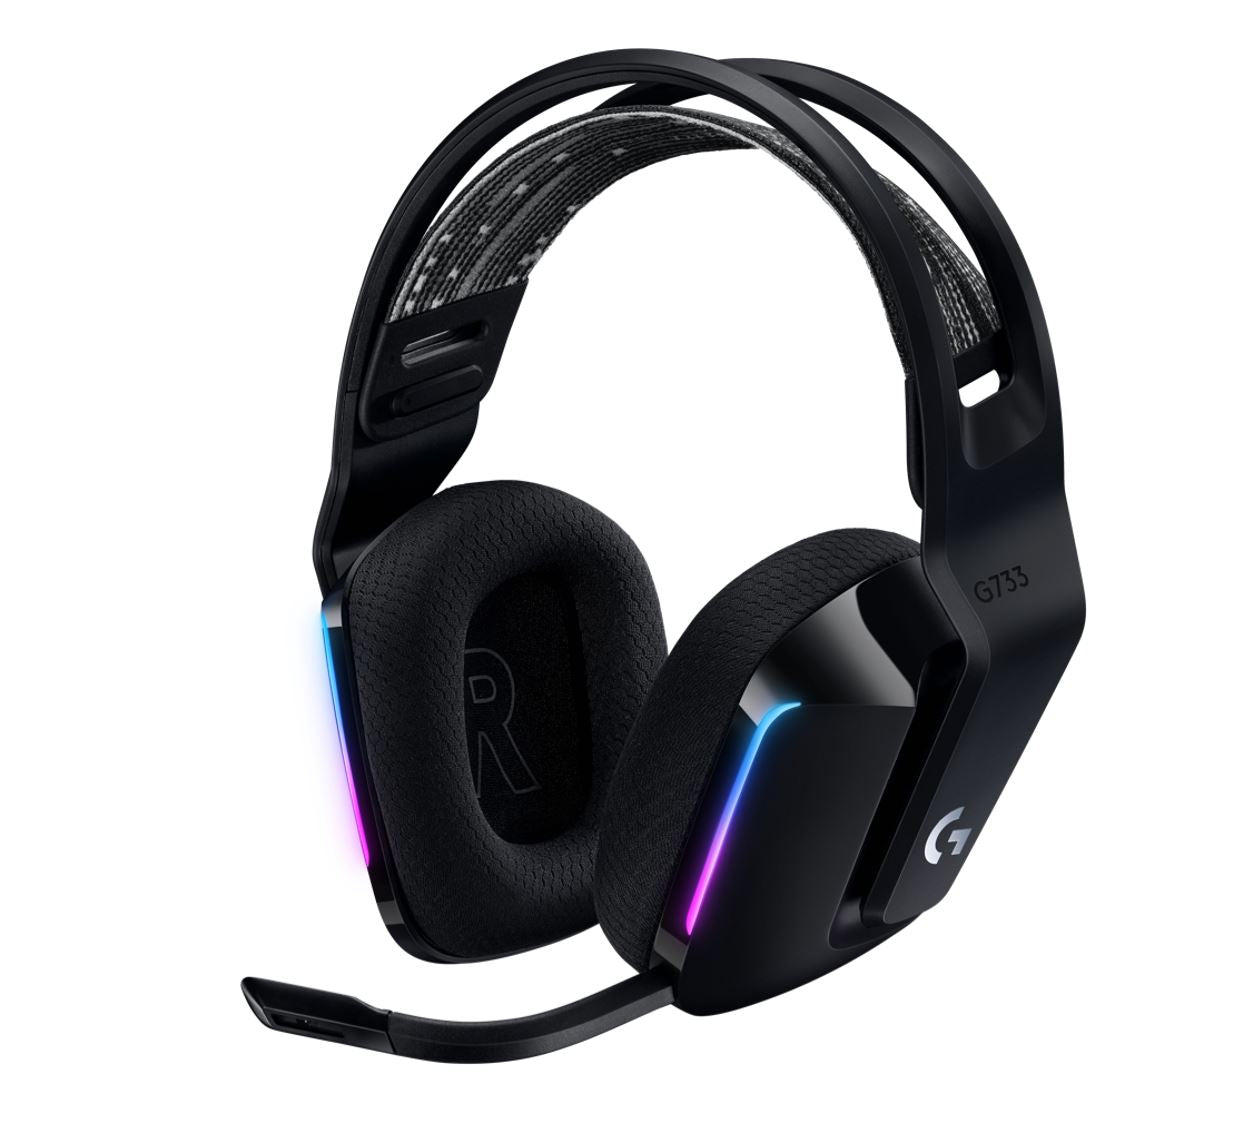 G733 Lightspeed Wireless RGB Gaming Headset Black USB, Frequency Response: 20 Hz-20 KHz - Detchable Cardioid Unidirectional Microphone